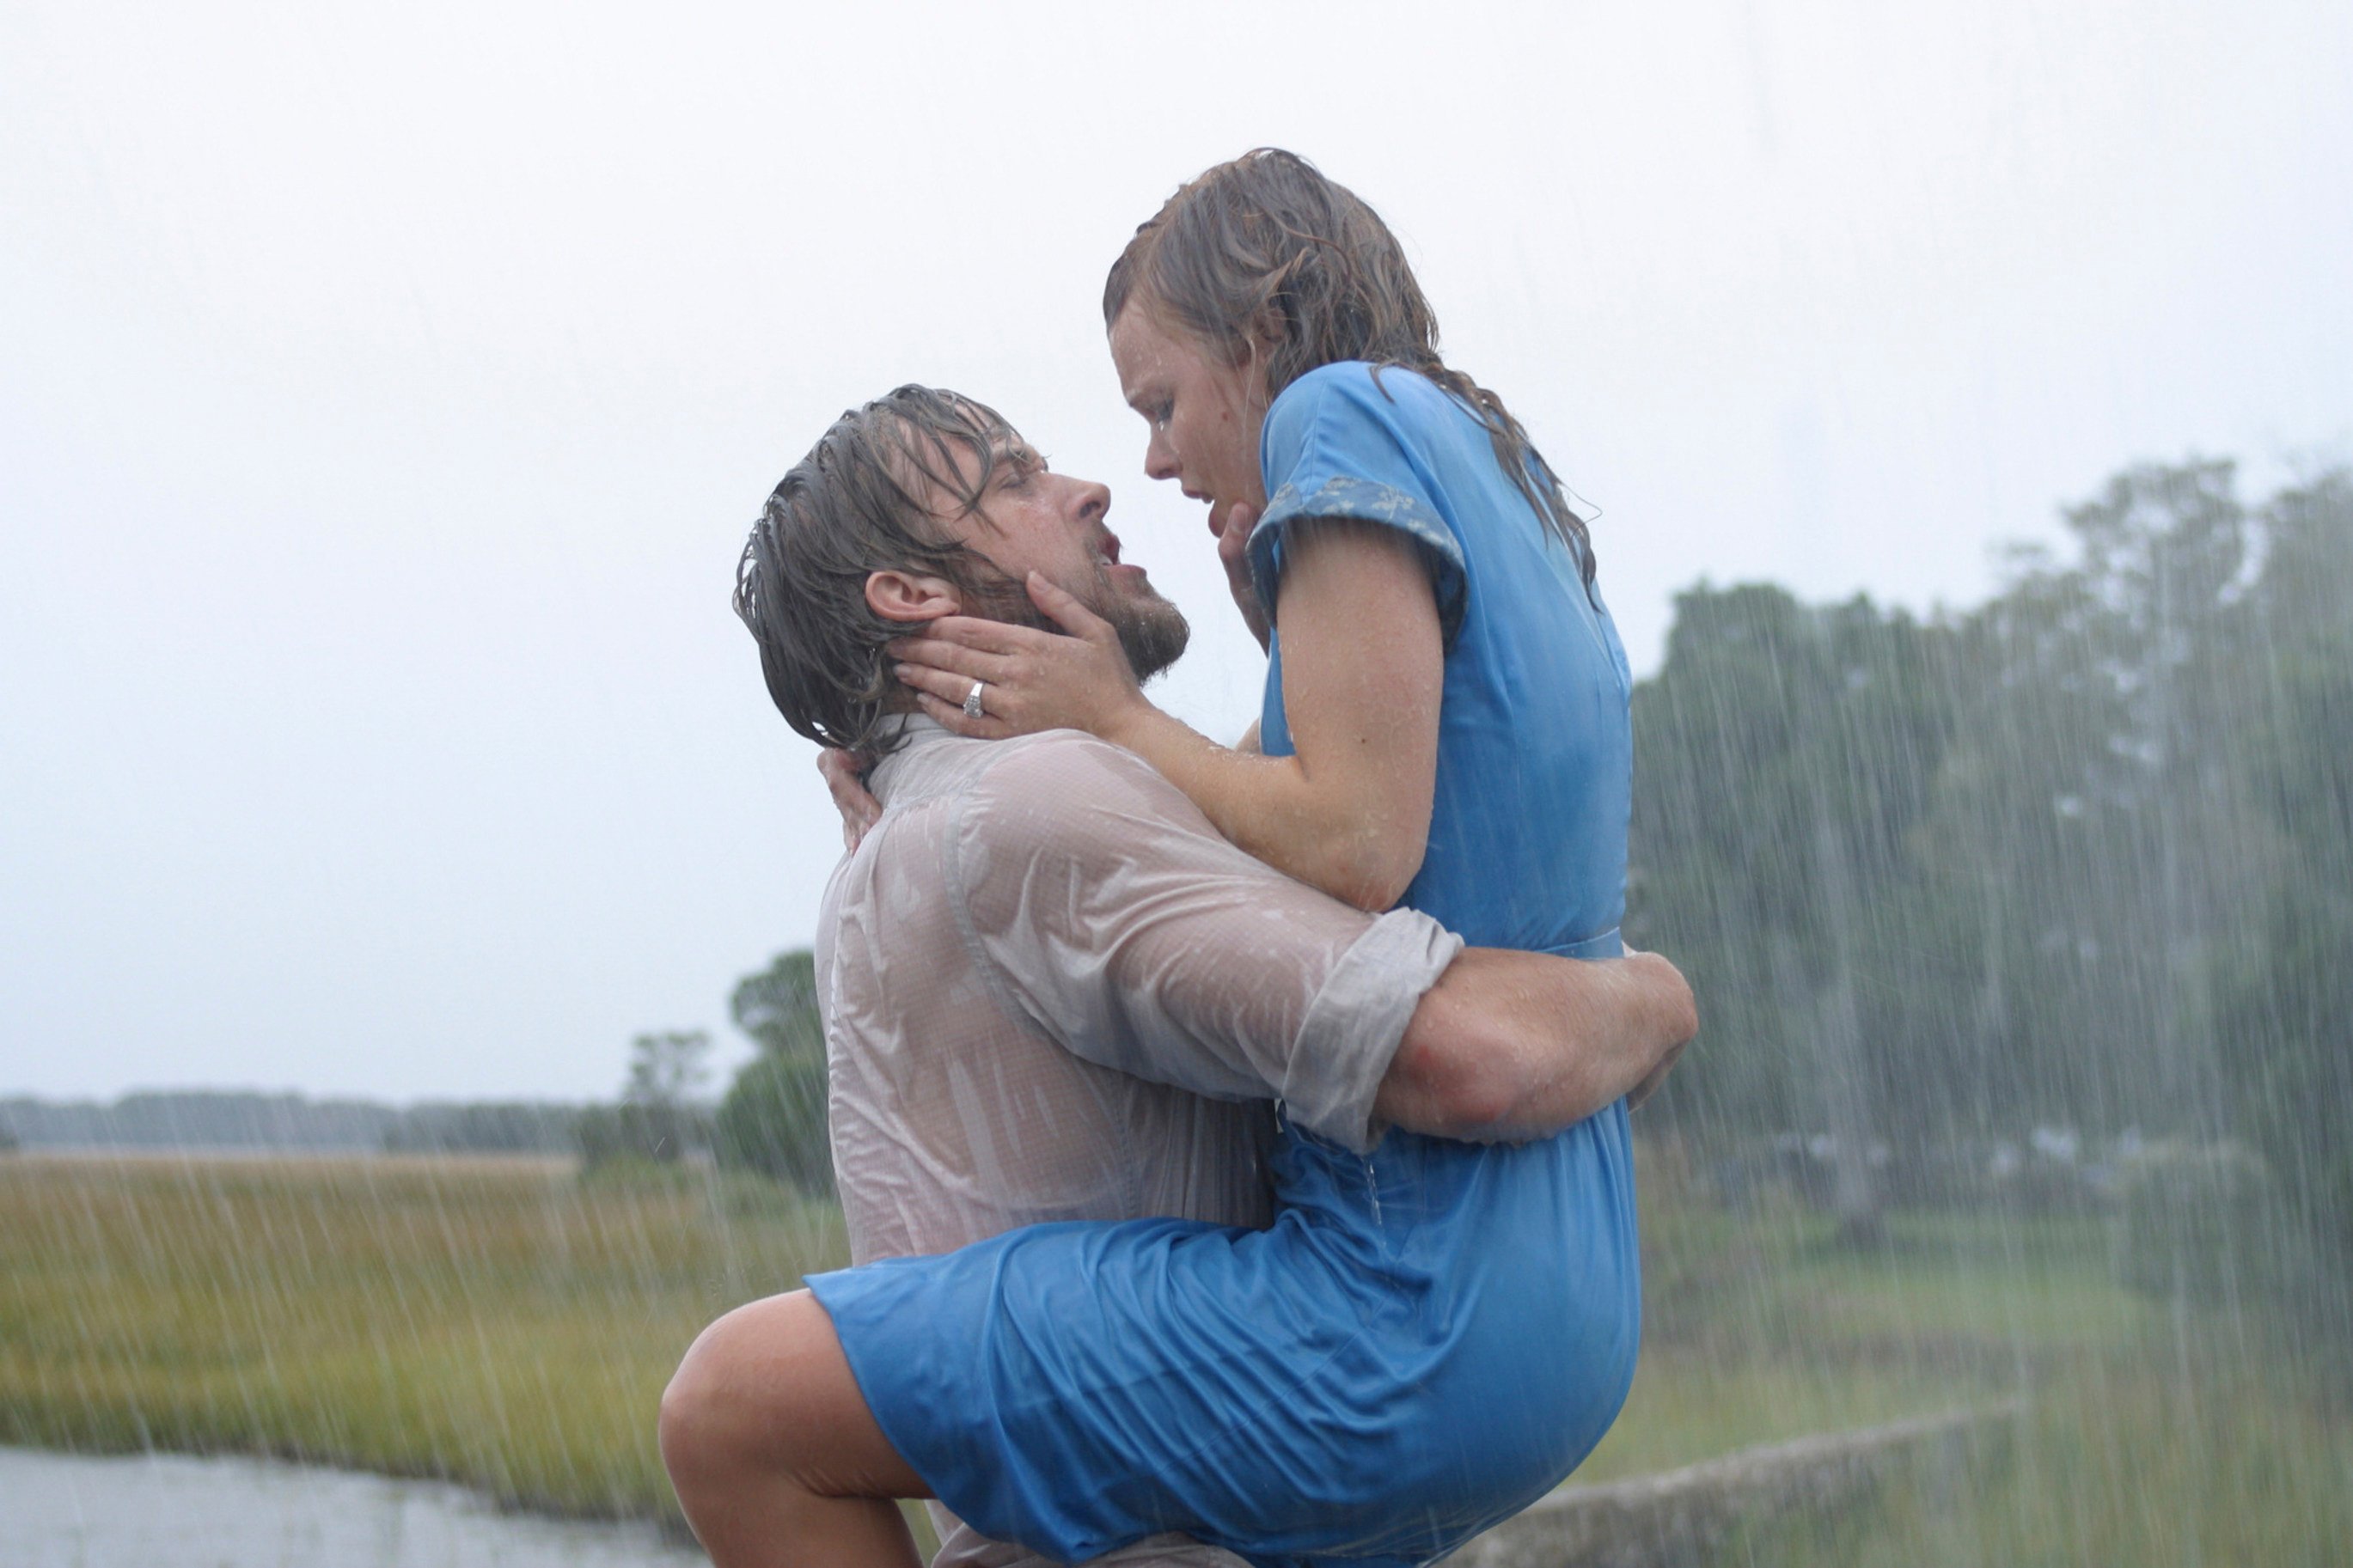 Ryan Gosling and Rachel McAdams in a still from The Notebook. Ironically for a romance, they had to overcome a mutual dislike. Equally ironic, they fell in love after making the 2004 romance, which shot both of them to stardom. Photo: New Line Cinema